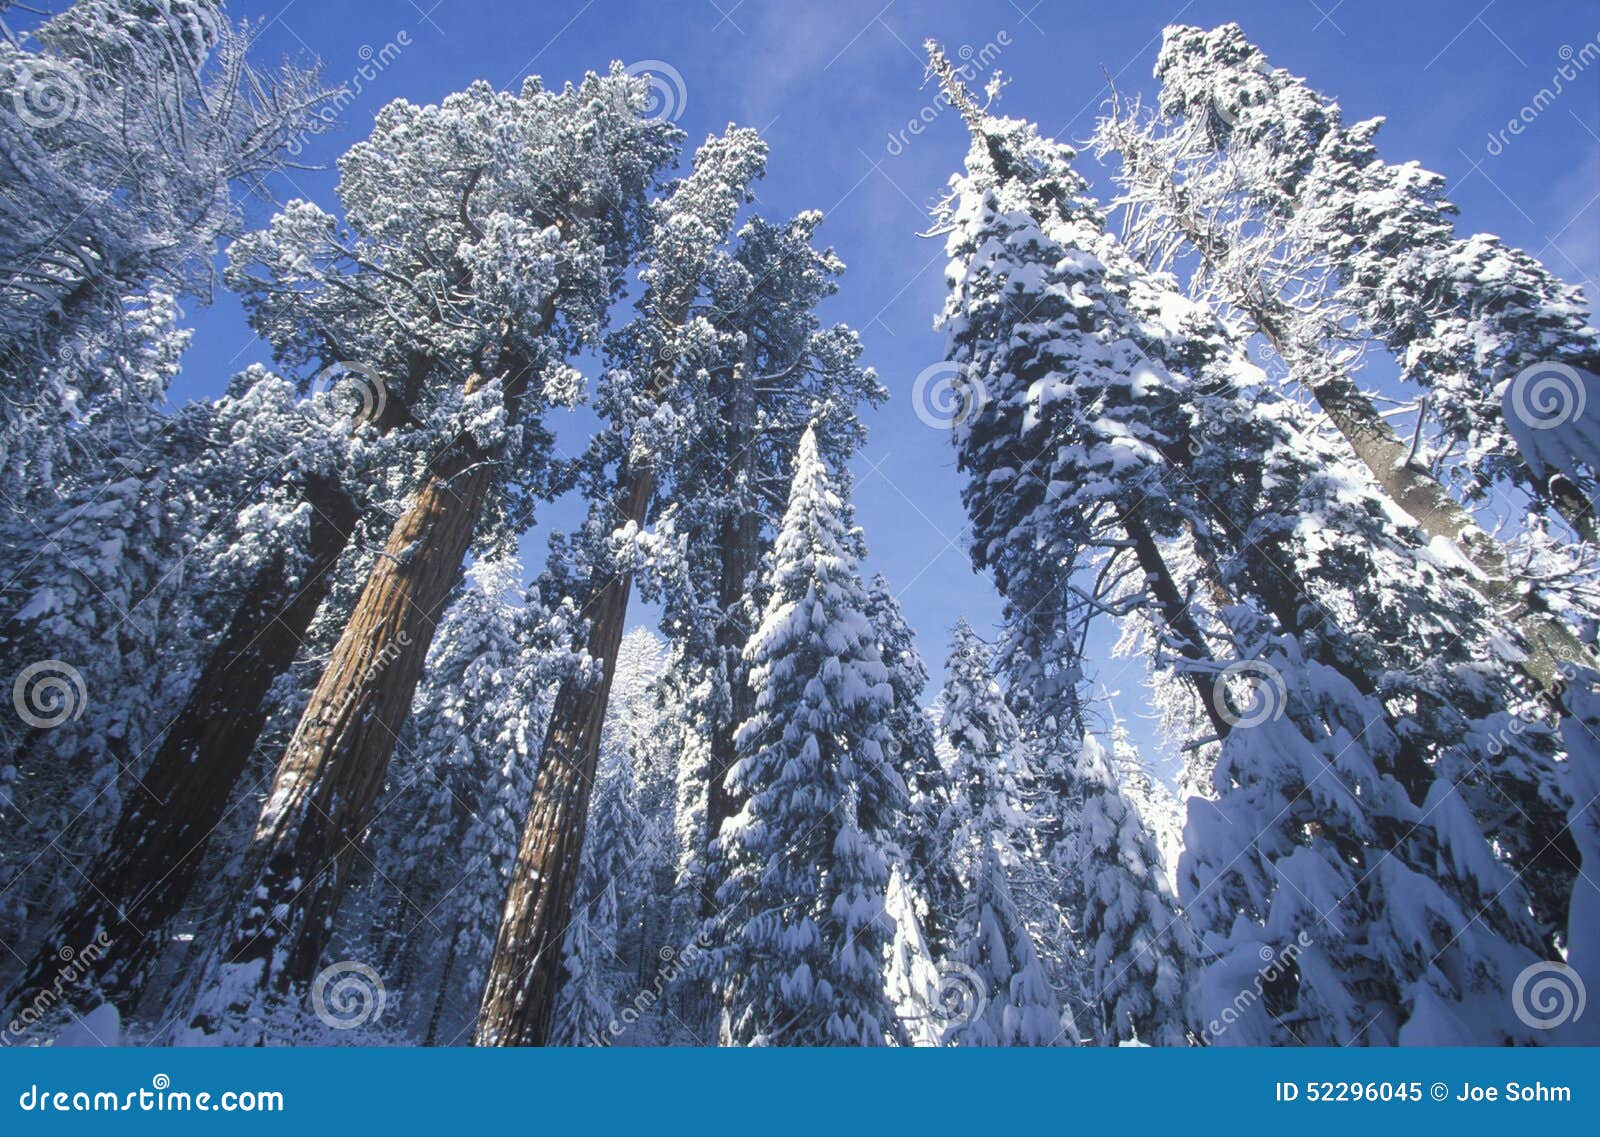 redwoods covered in snow, sequoia national park, california